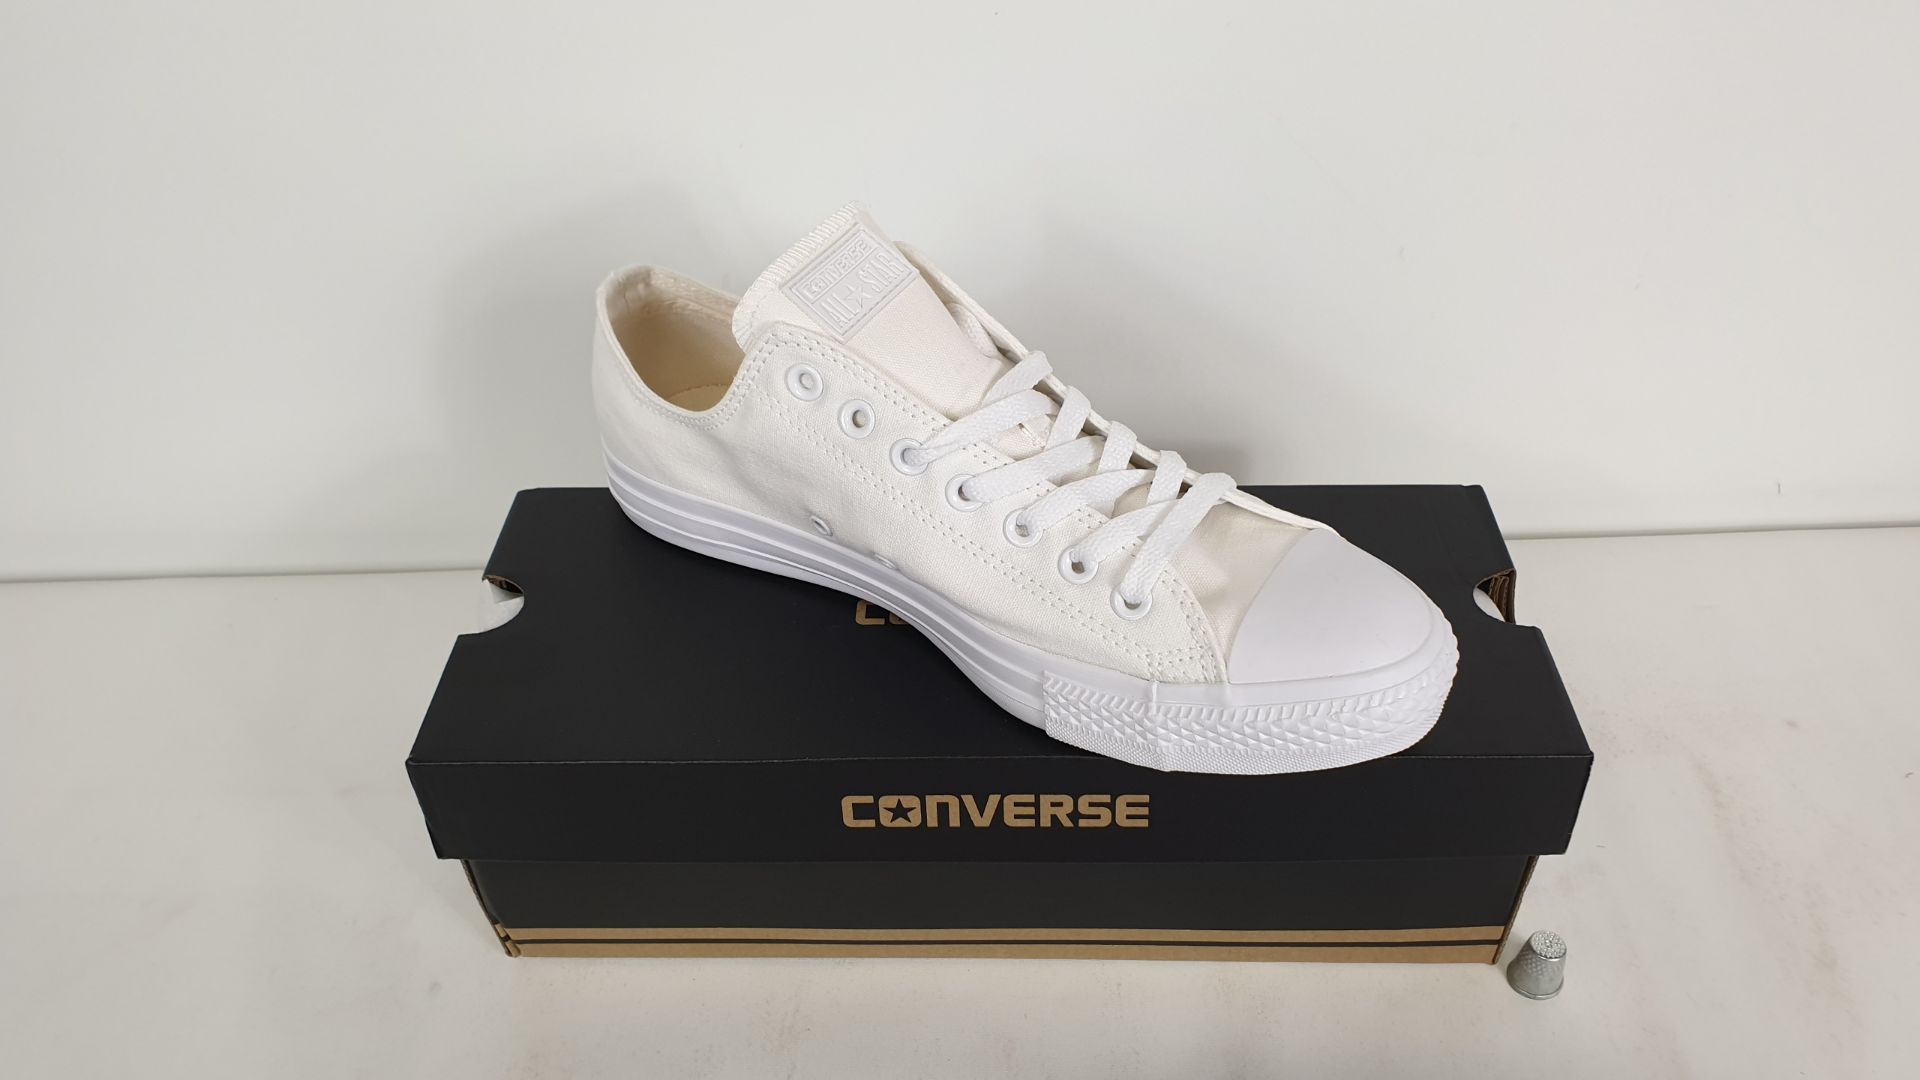 6 X PAIRS OF CONVERSE TRAINERS CT WHITE MONOCH SIZE 10 - BRAND NEW AND BOXED